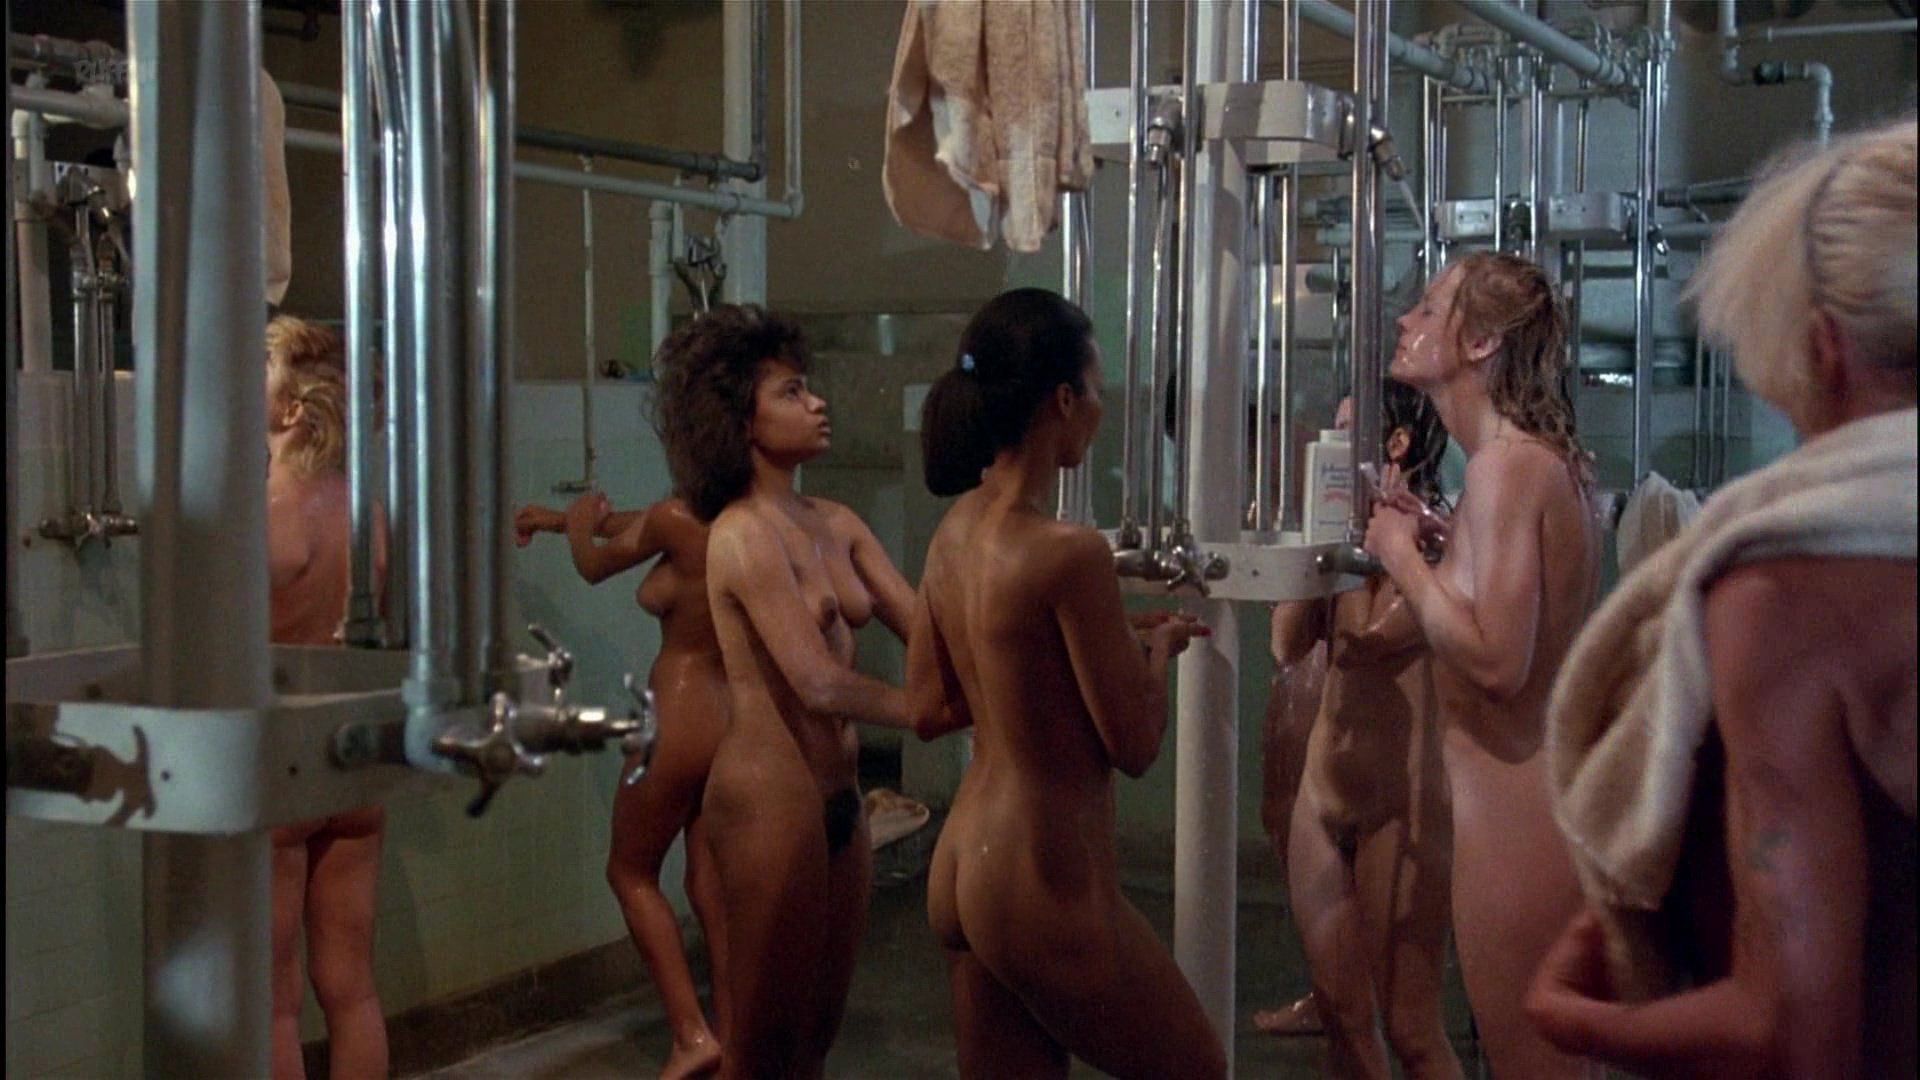 The Naked Girls from Private School.